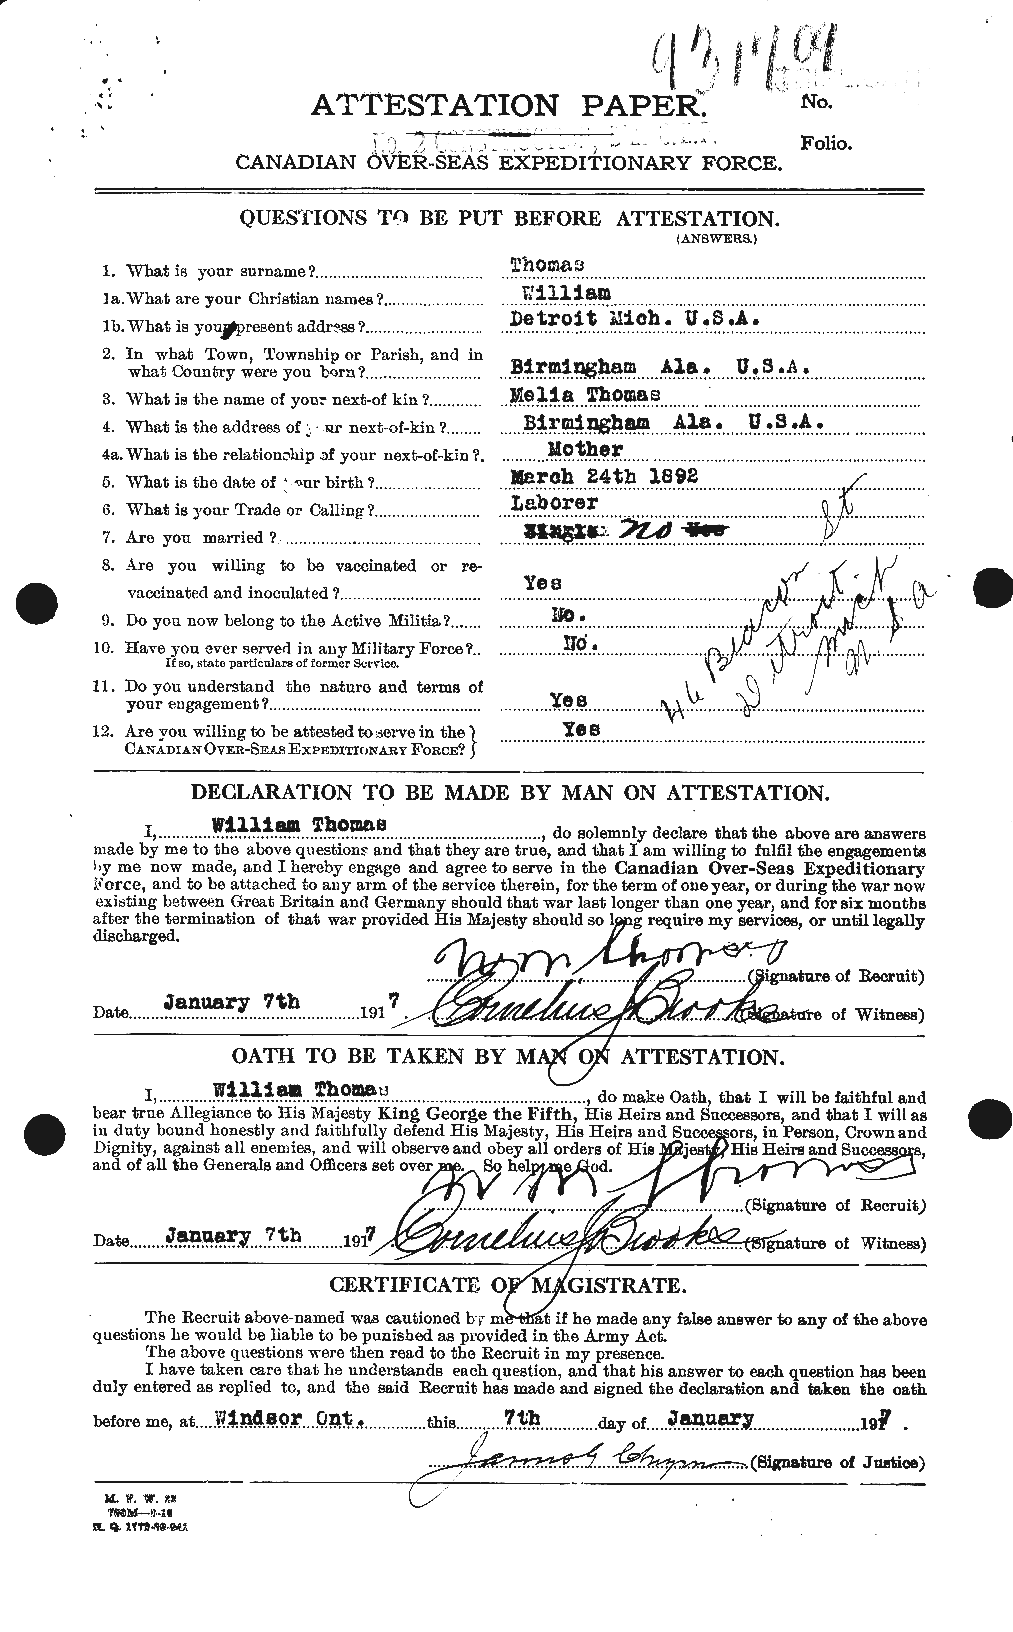 Personnel Records of the First World War - CEF 632773a